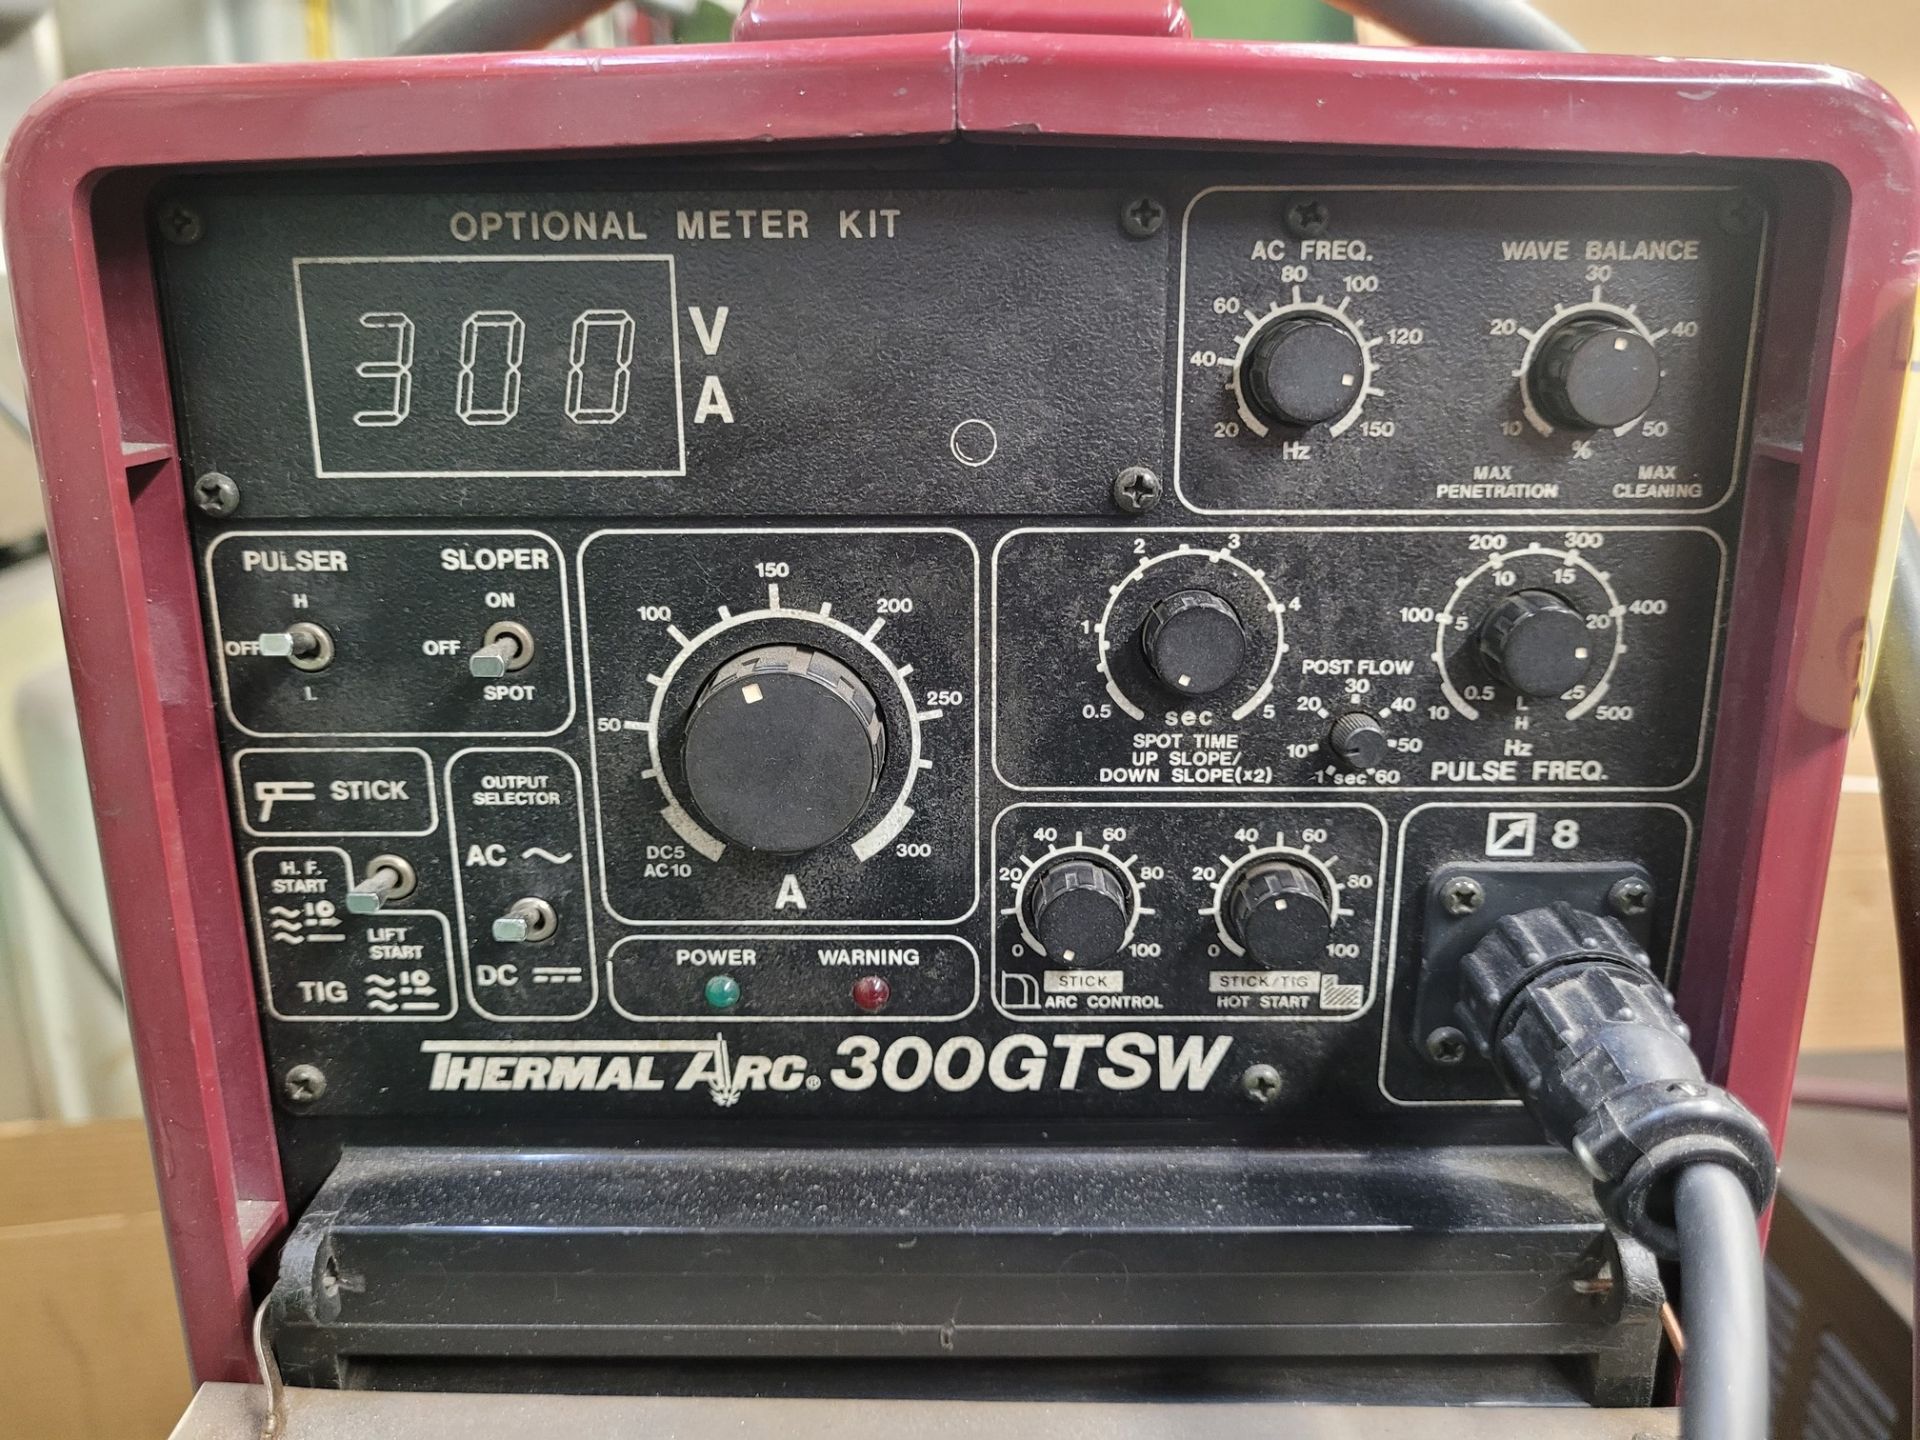 THERMAL ARC 300GTSW ARC WELDER, S/N 000920A188809G W/ TWECO TC900 COOLING UNIT (NO TANKS) - Image 3 of 5